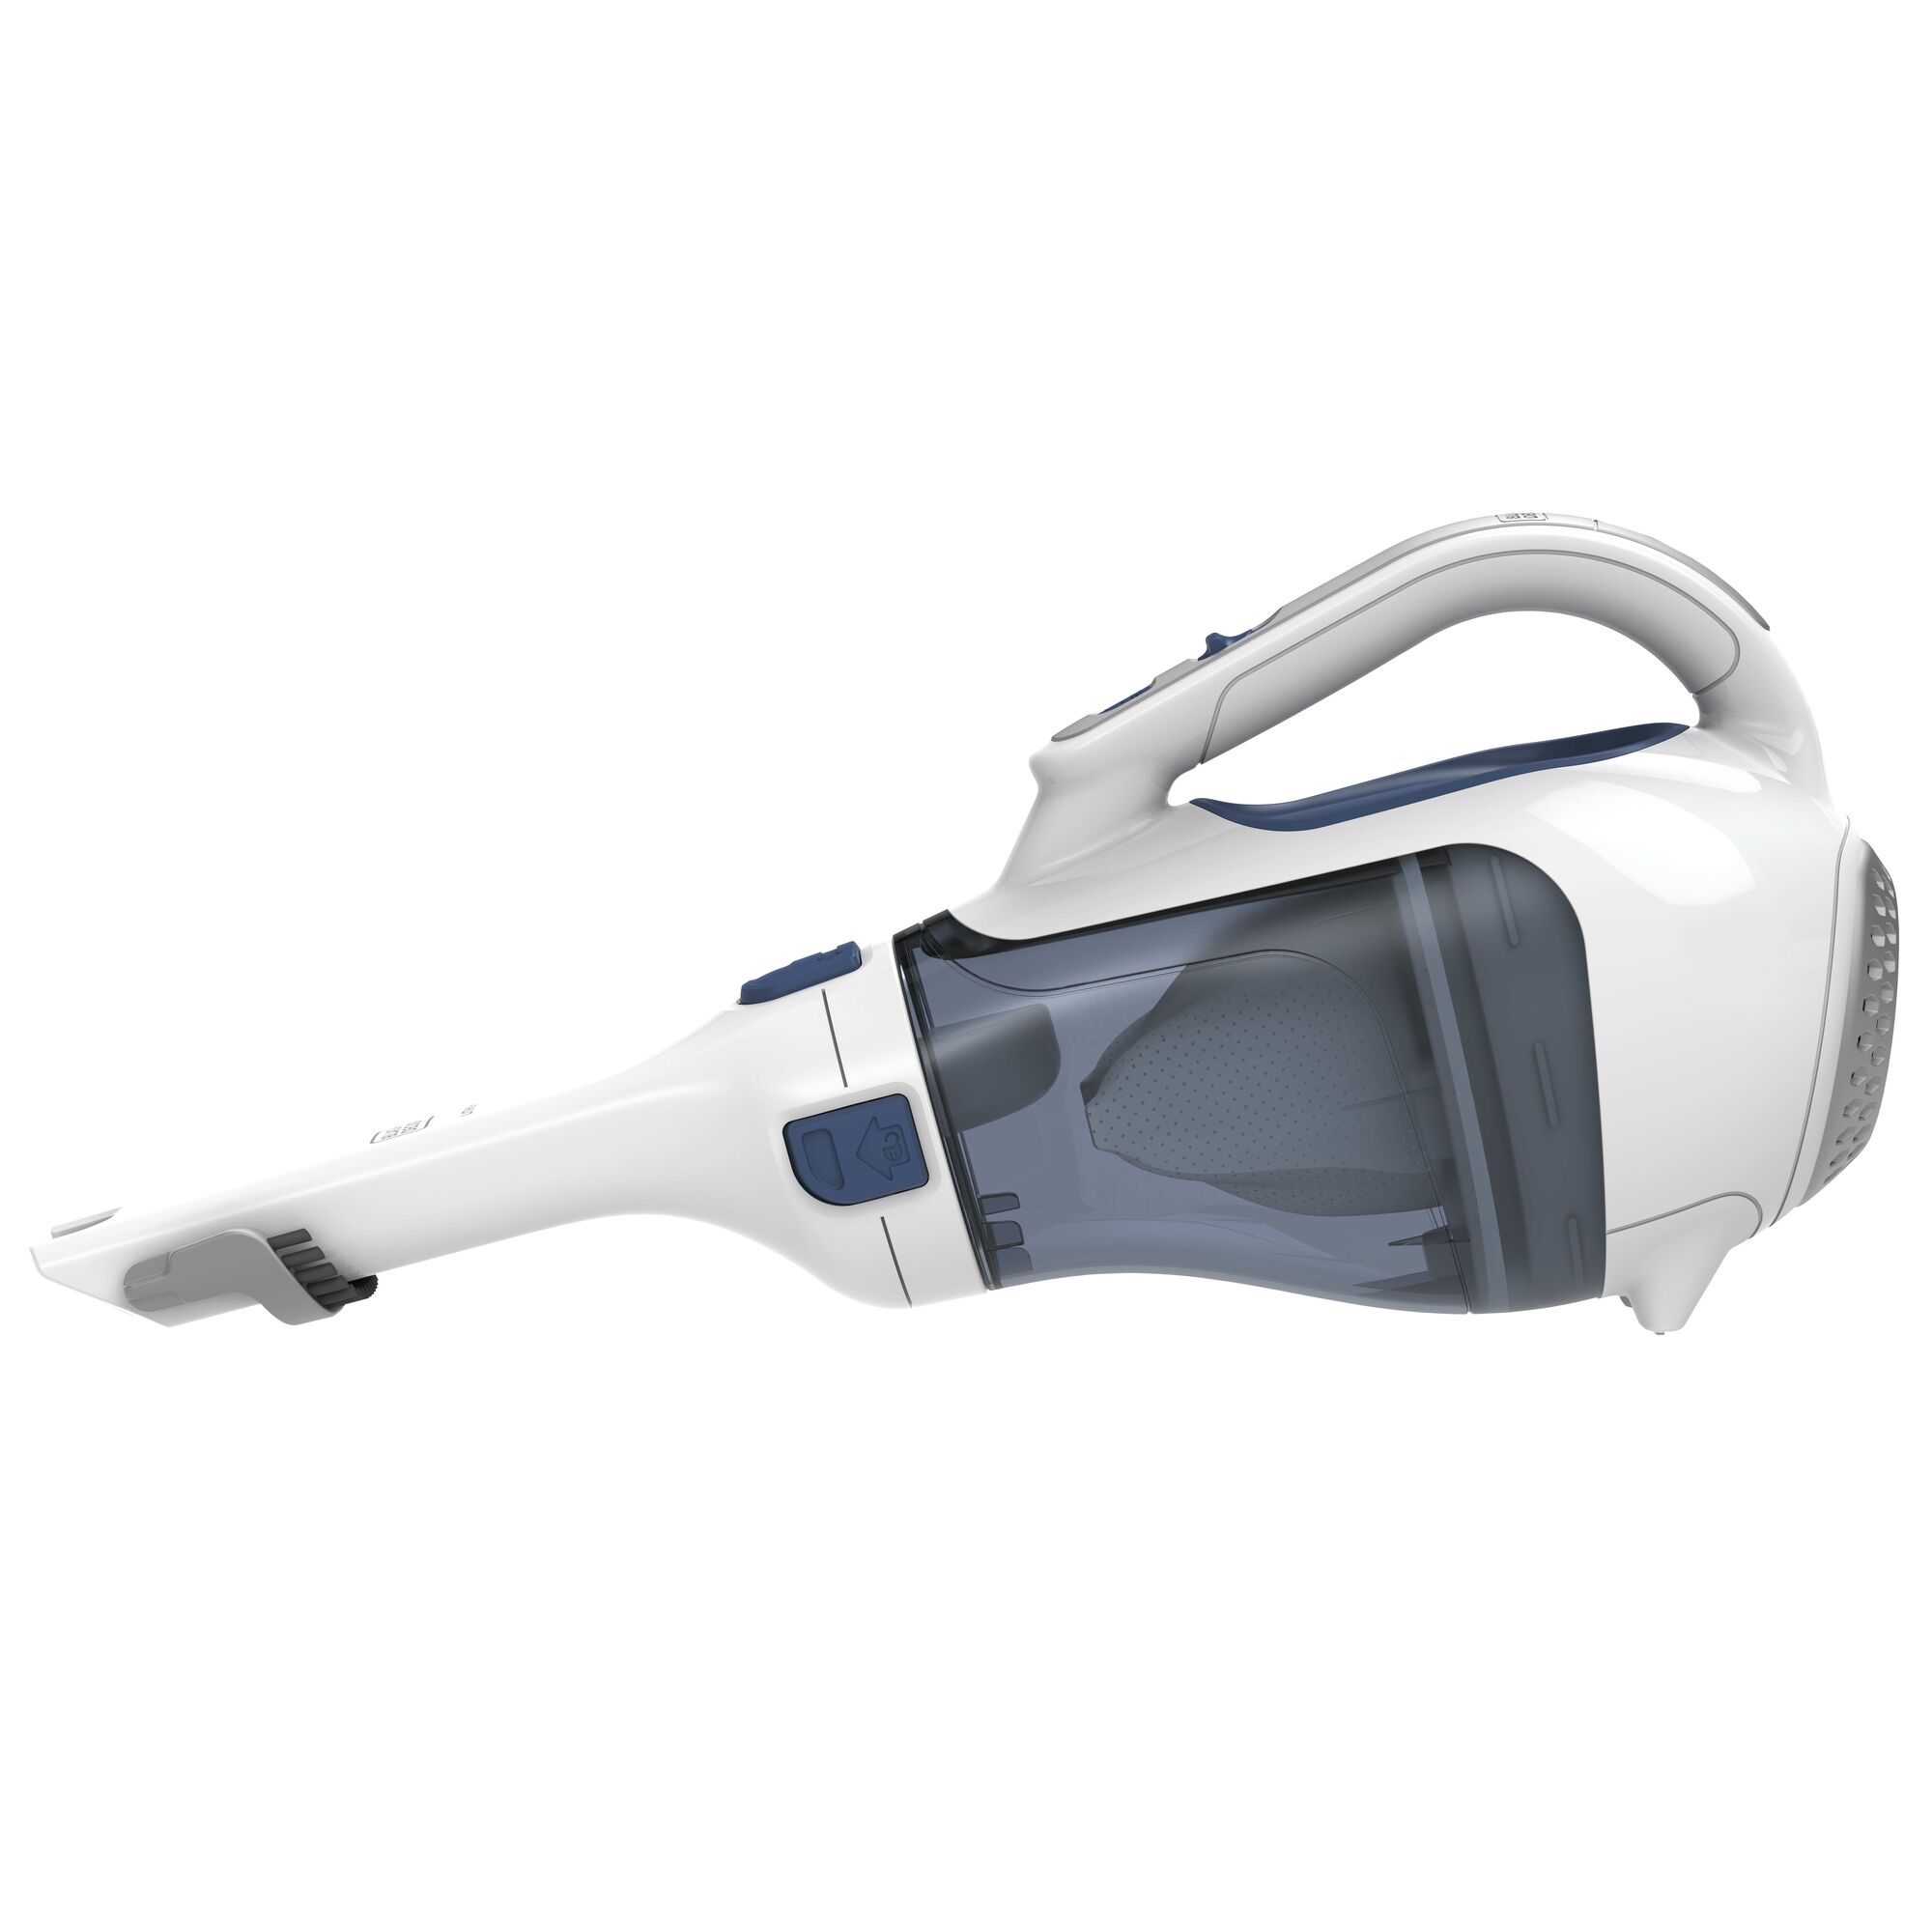 Profile of dustbuster cordless hand vacuum.